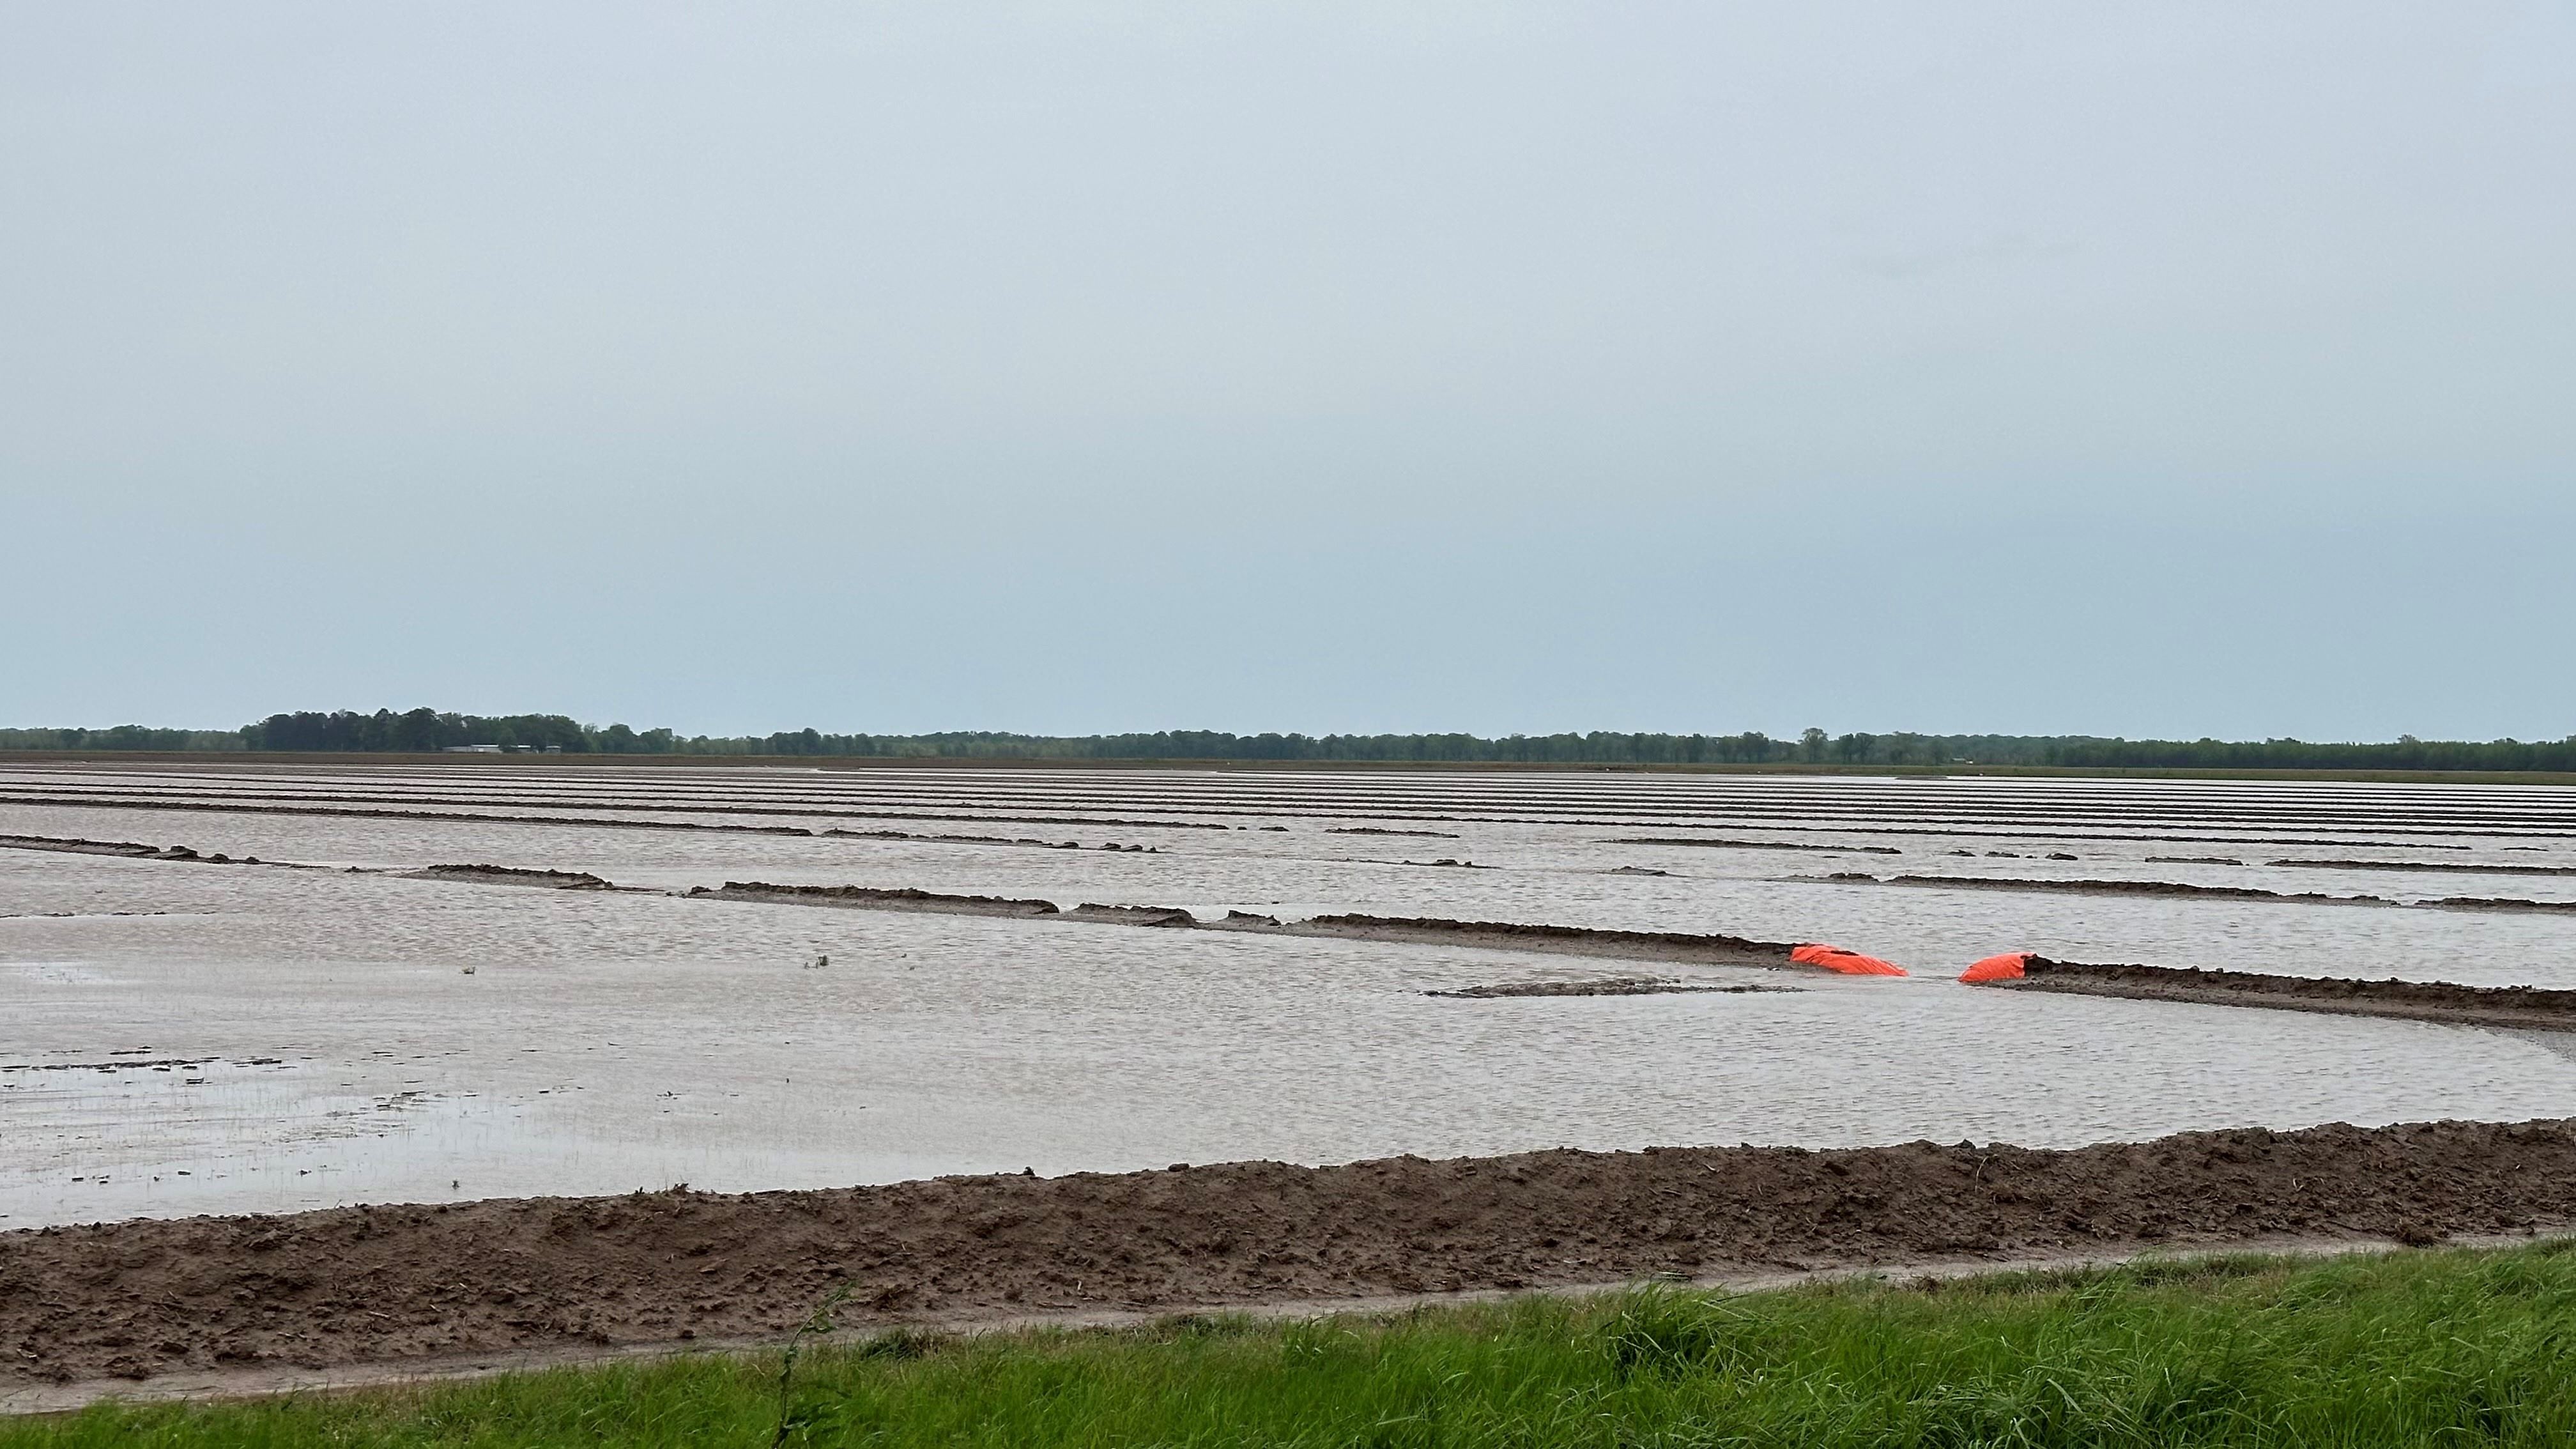 Central and South Arkansas rains have punished levees in some early planted rice fields